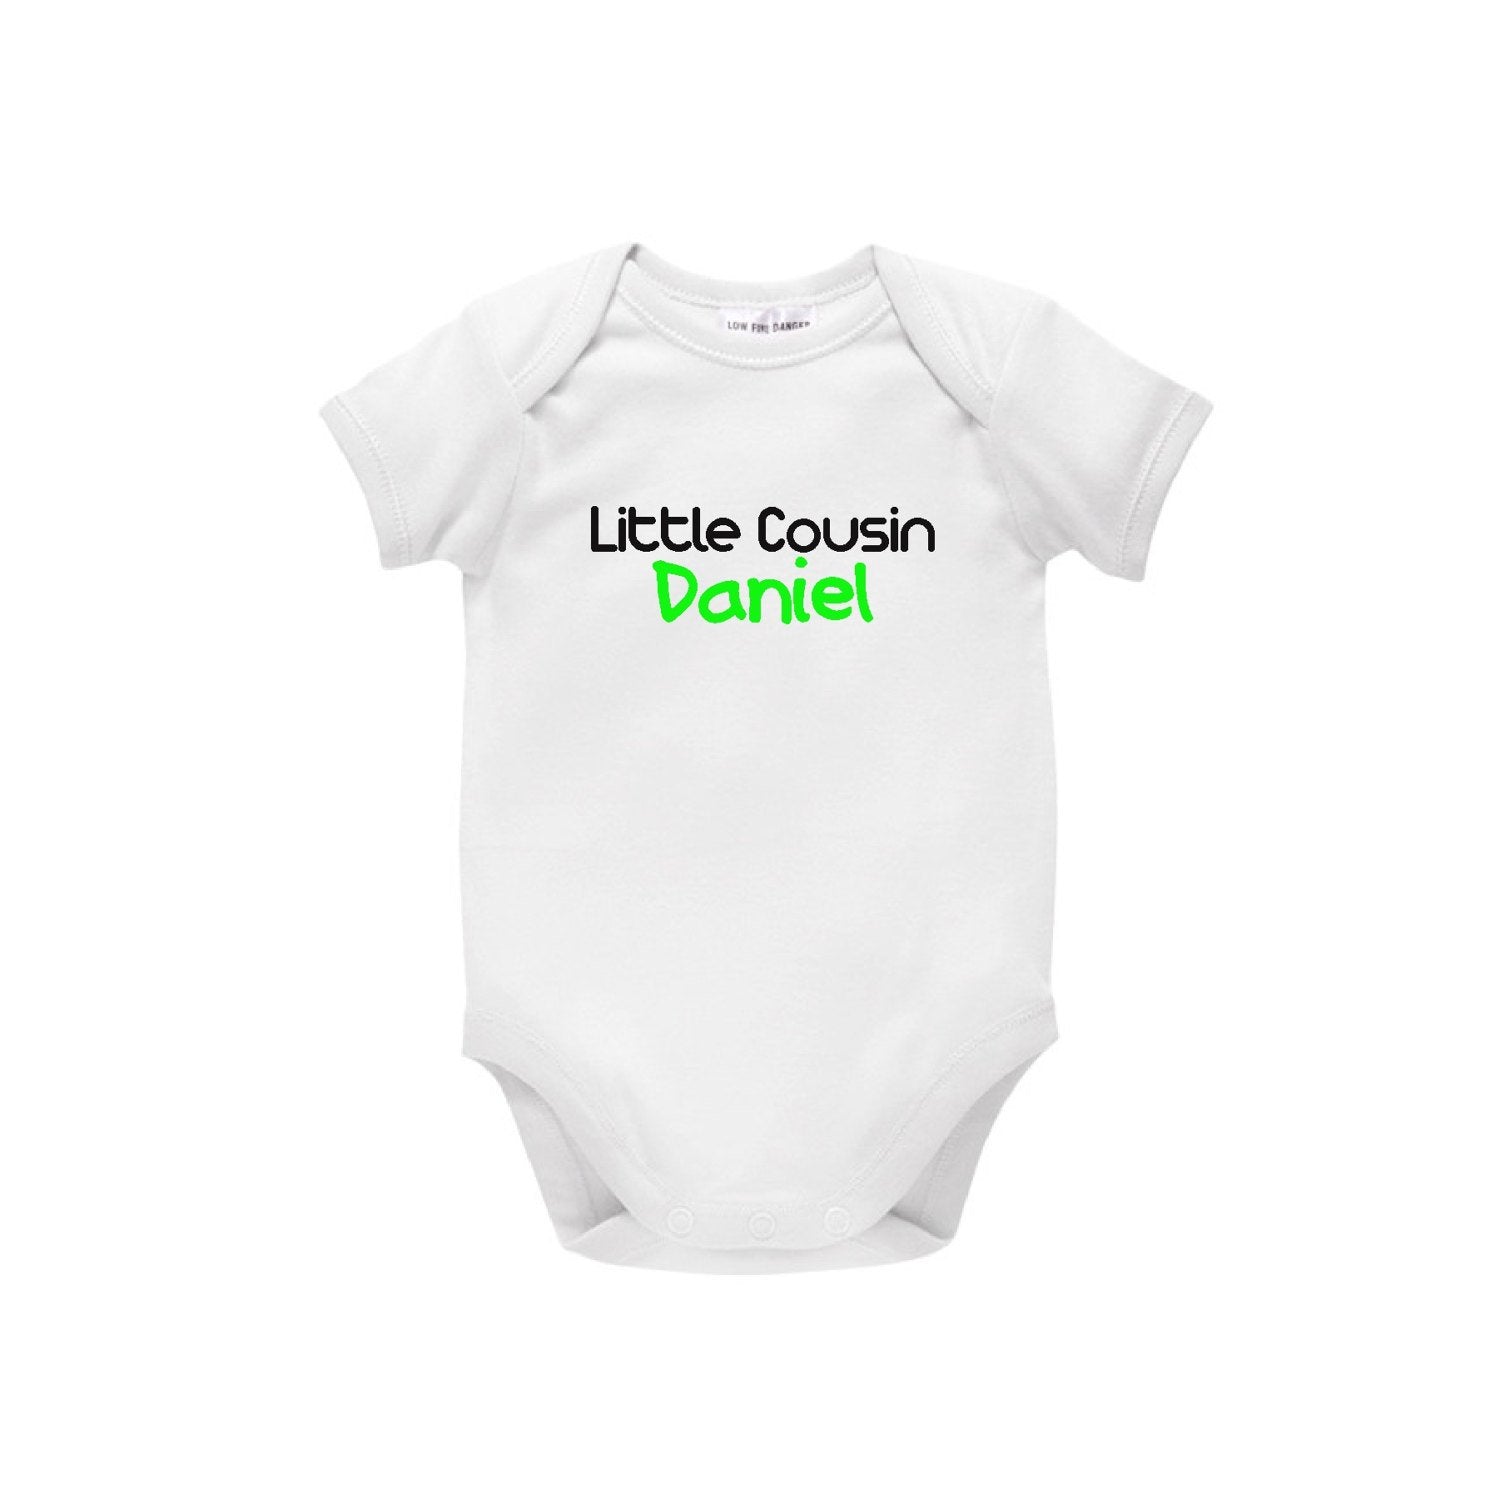 Little Cousin Personalised Baby Bodysuit, Pregnancy Announcement, Family Clothing, New Baby Gift, Baby Shower Gift, Cousin To Be, U-W-BS